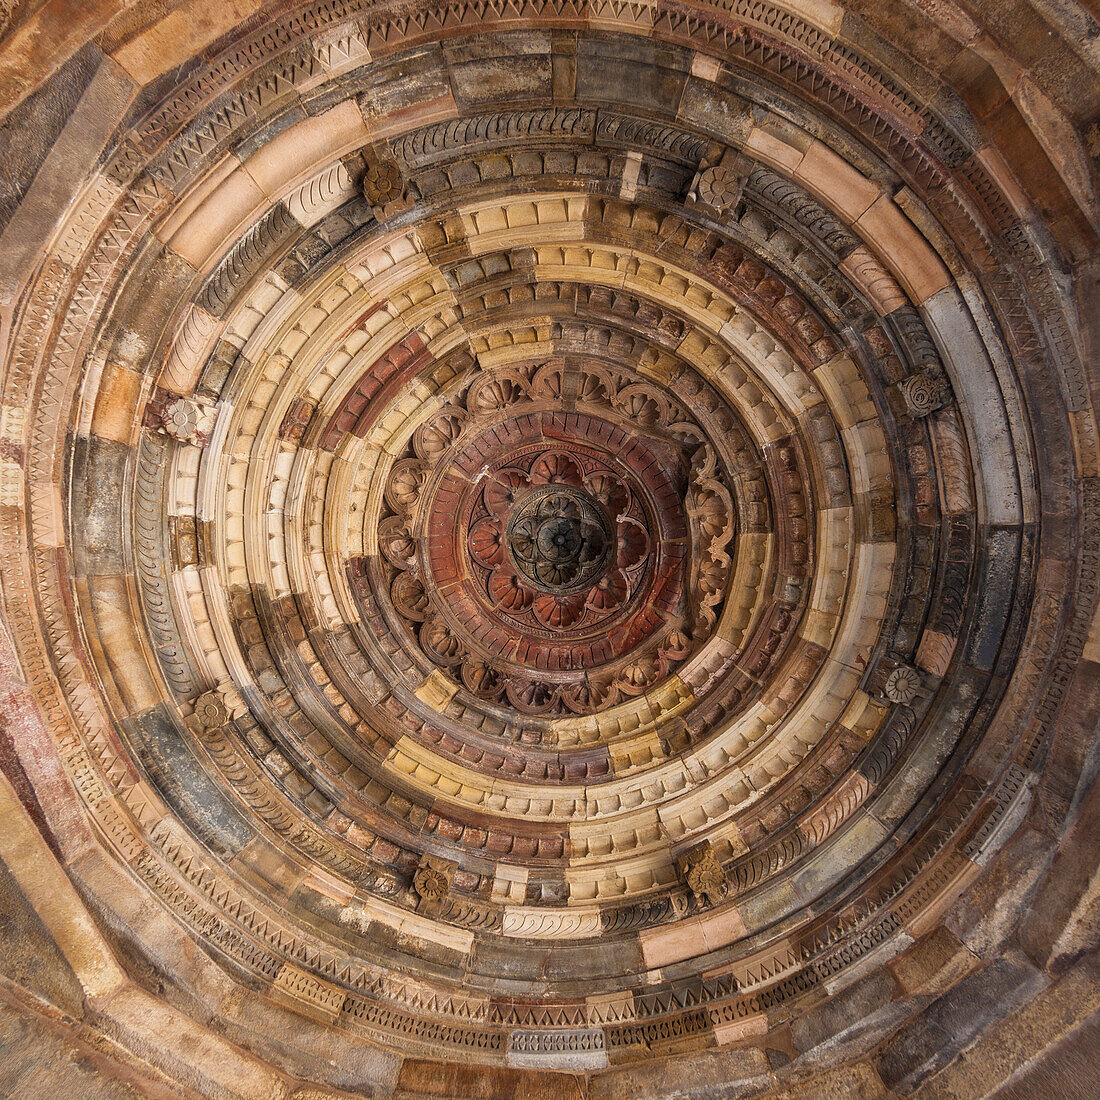 Asia. India, Ceiling details at the Qtub Minar of the Alai-Darwaza complex in New Delhi.